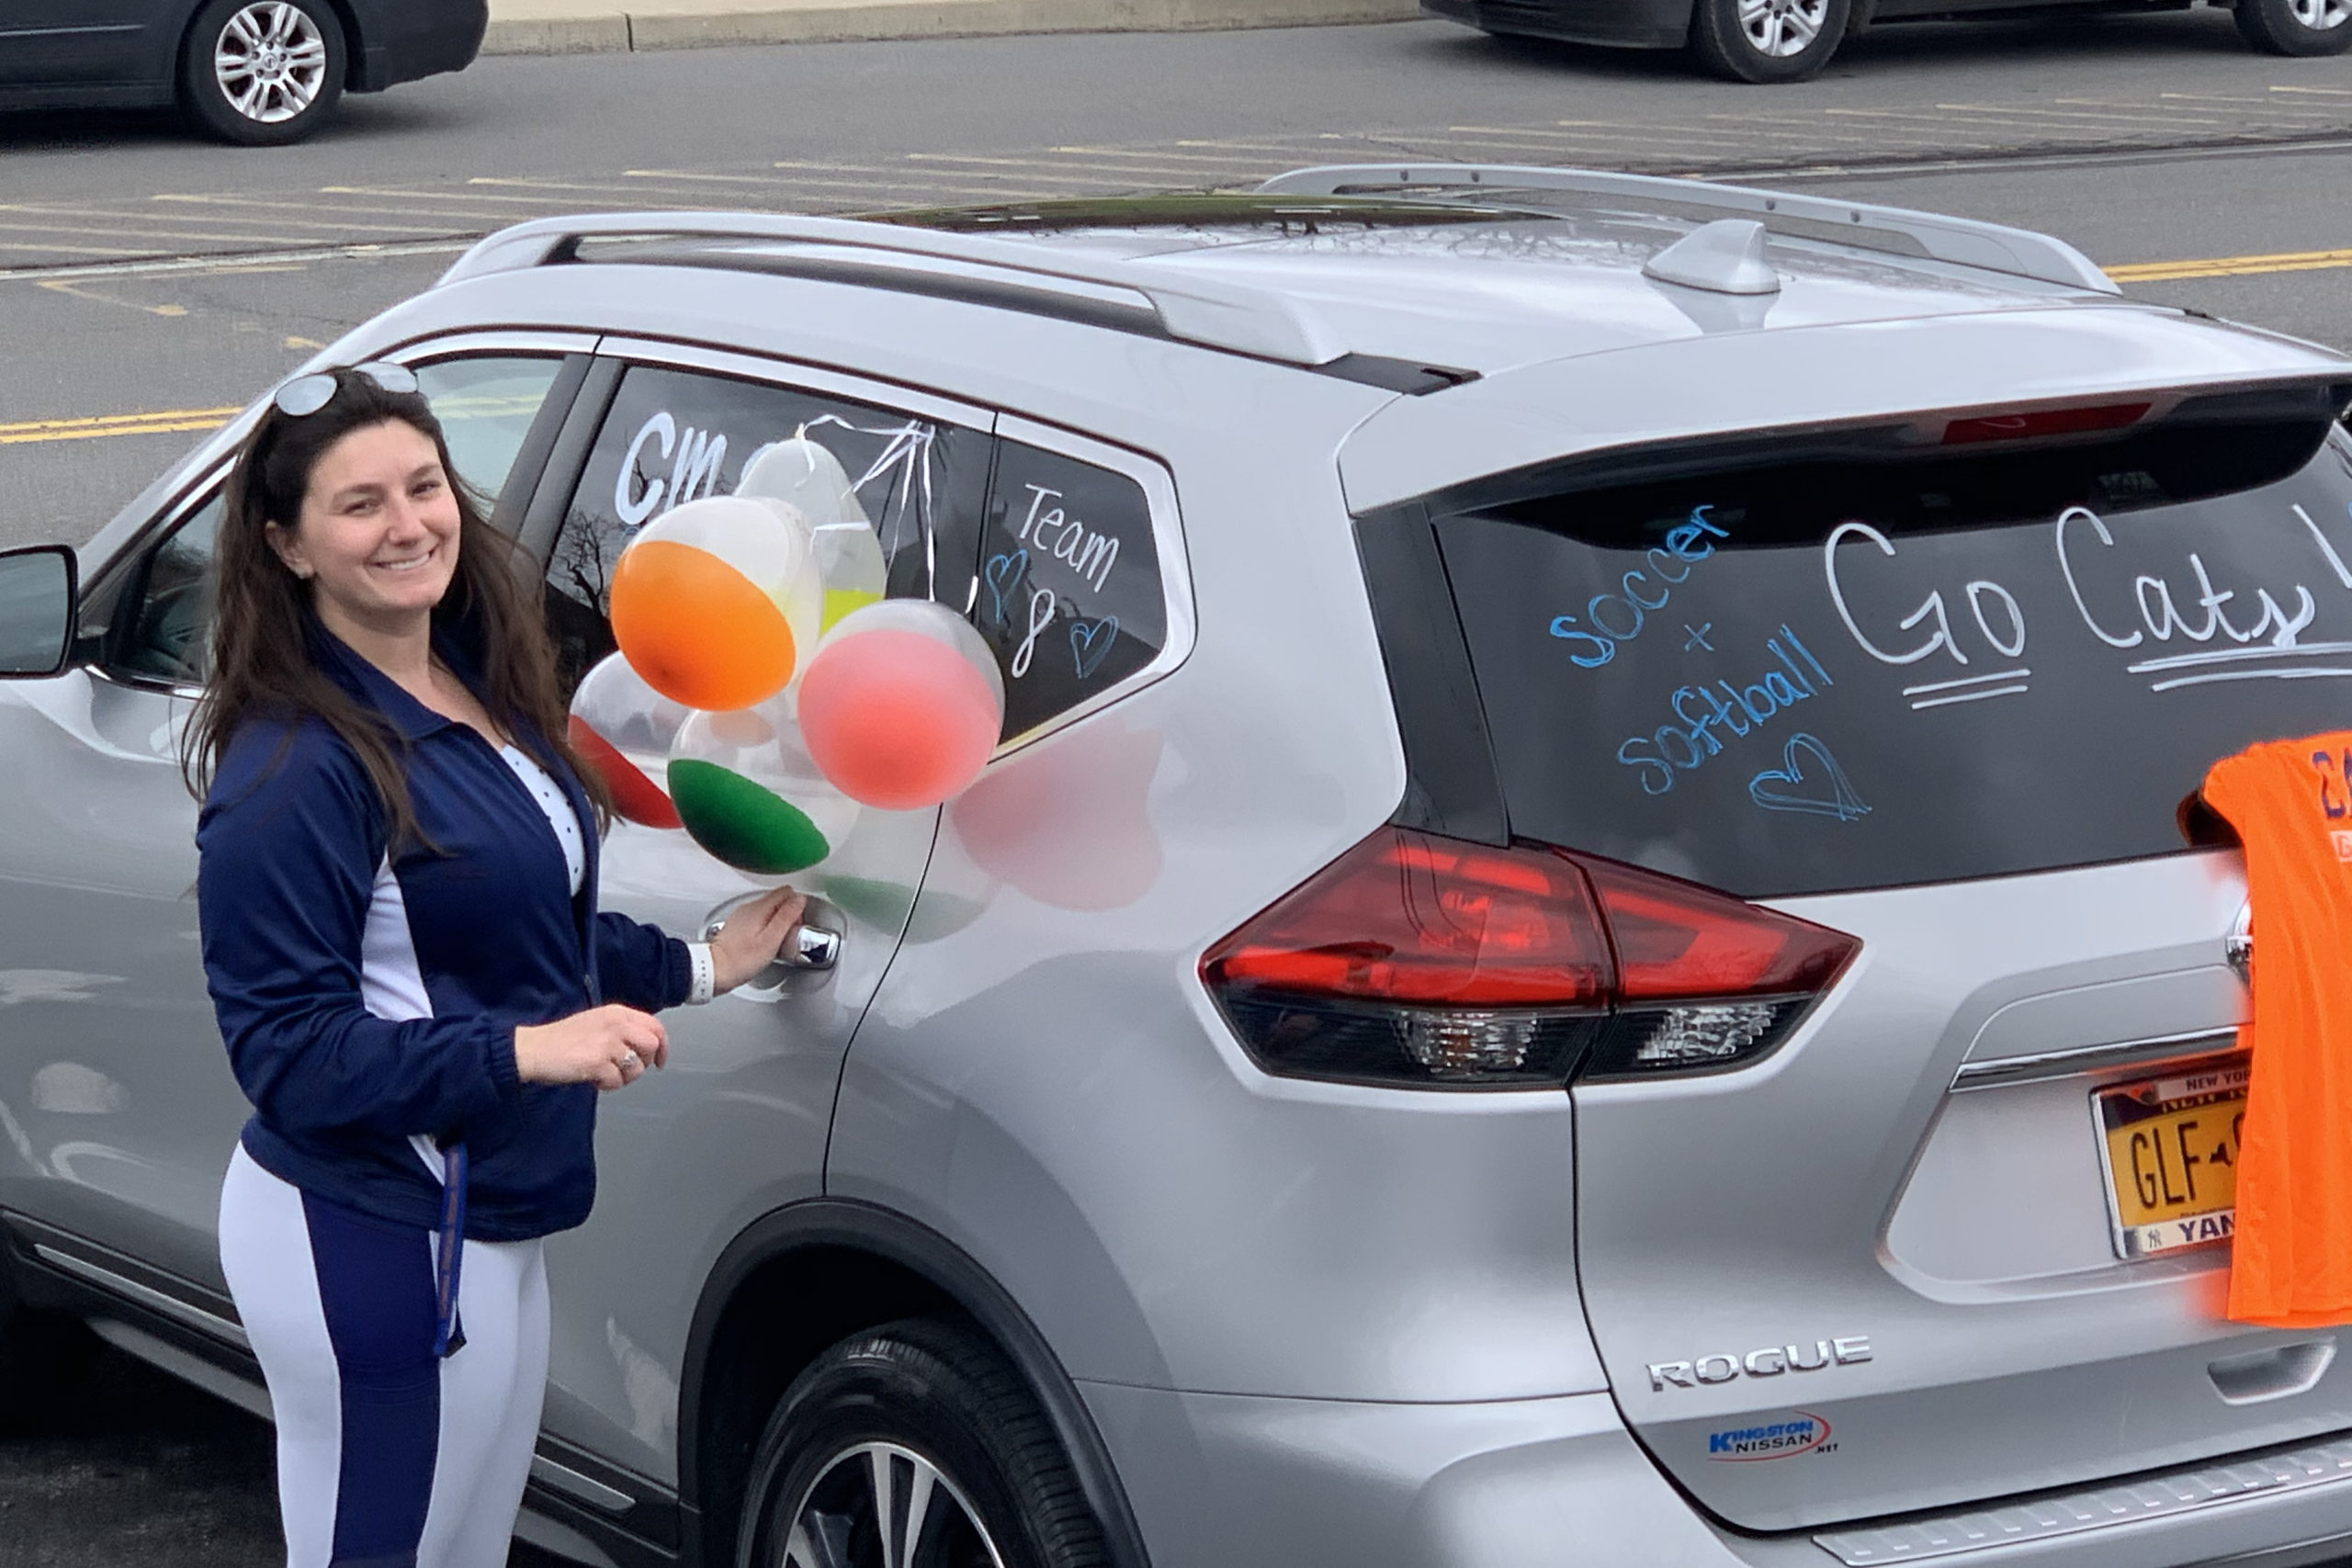 woman holding balloons next to decorated car